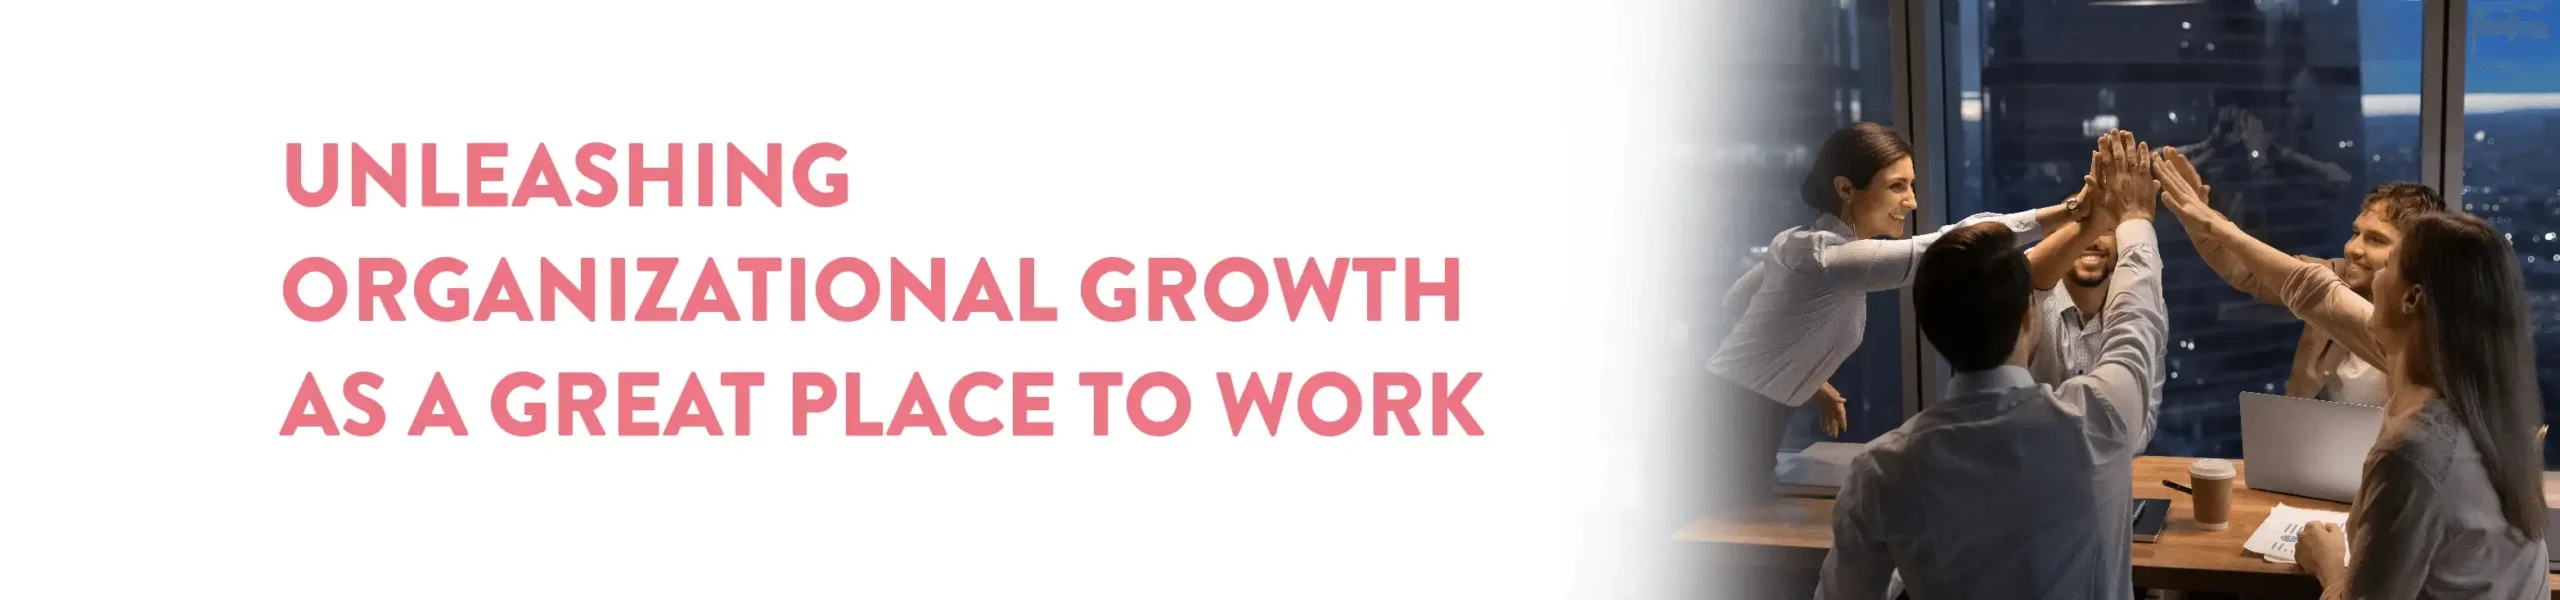 UNLEASHING ORGANIZATIONAL GROWTH AS A GREAT PLACE TO WORK